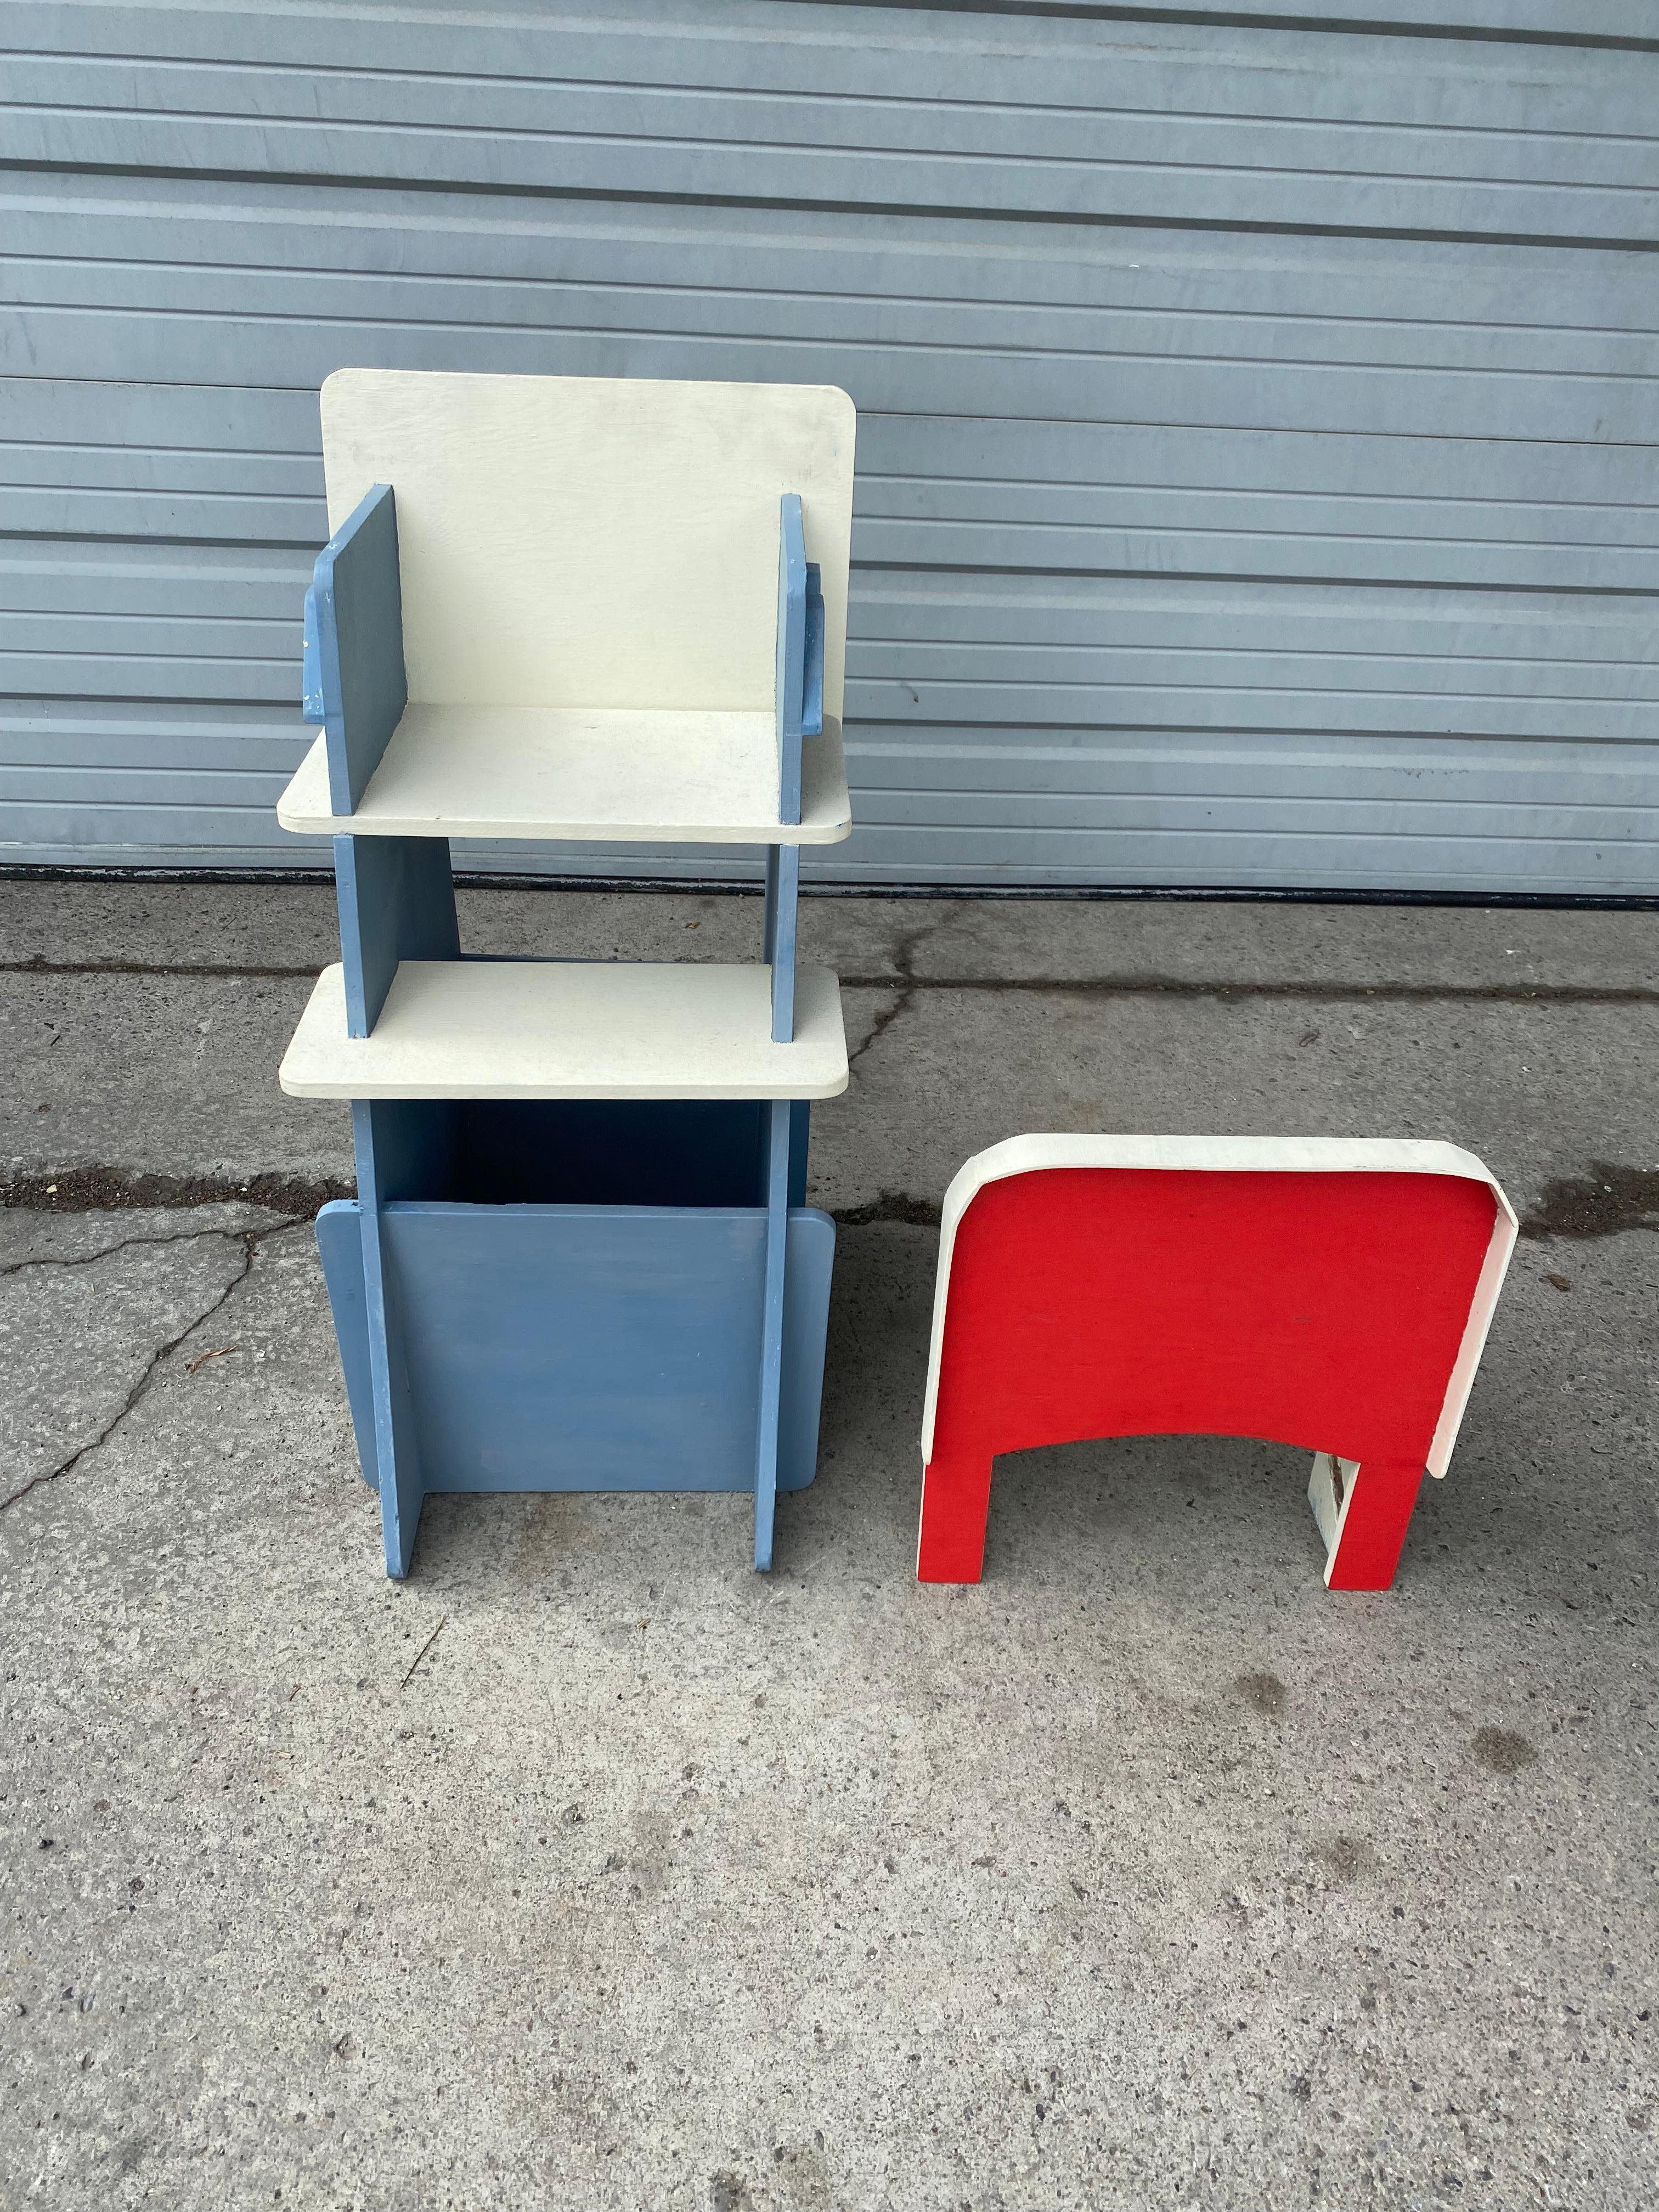 Late 20th Century Unusual Constructivist Childs High Chair, , Hand Crafted, , Bench Made, For Sale